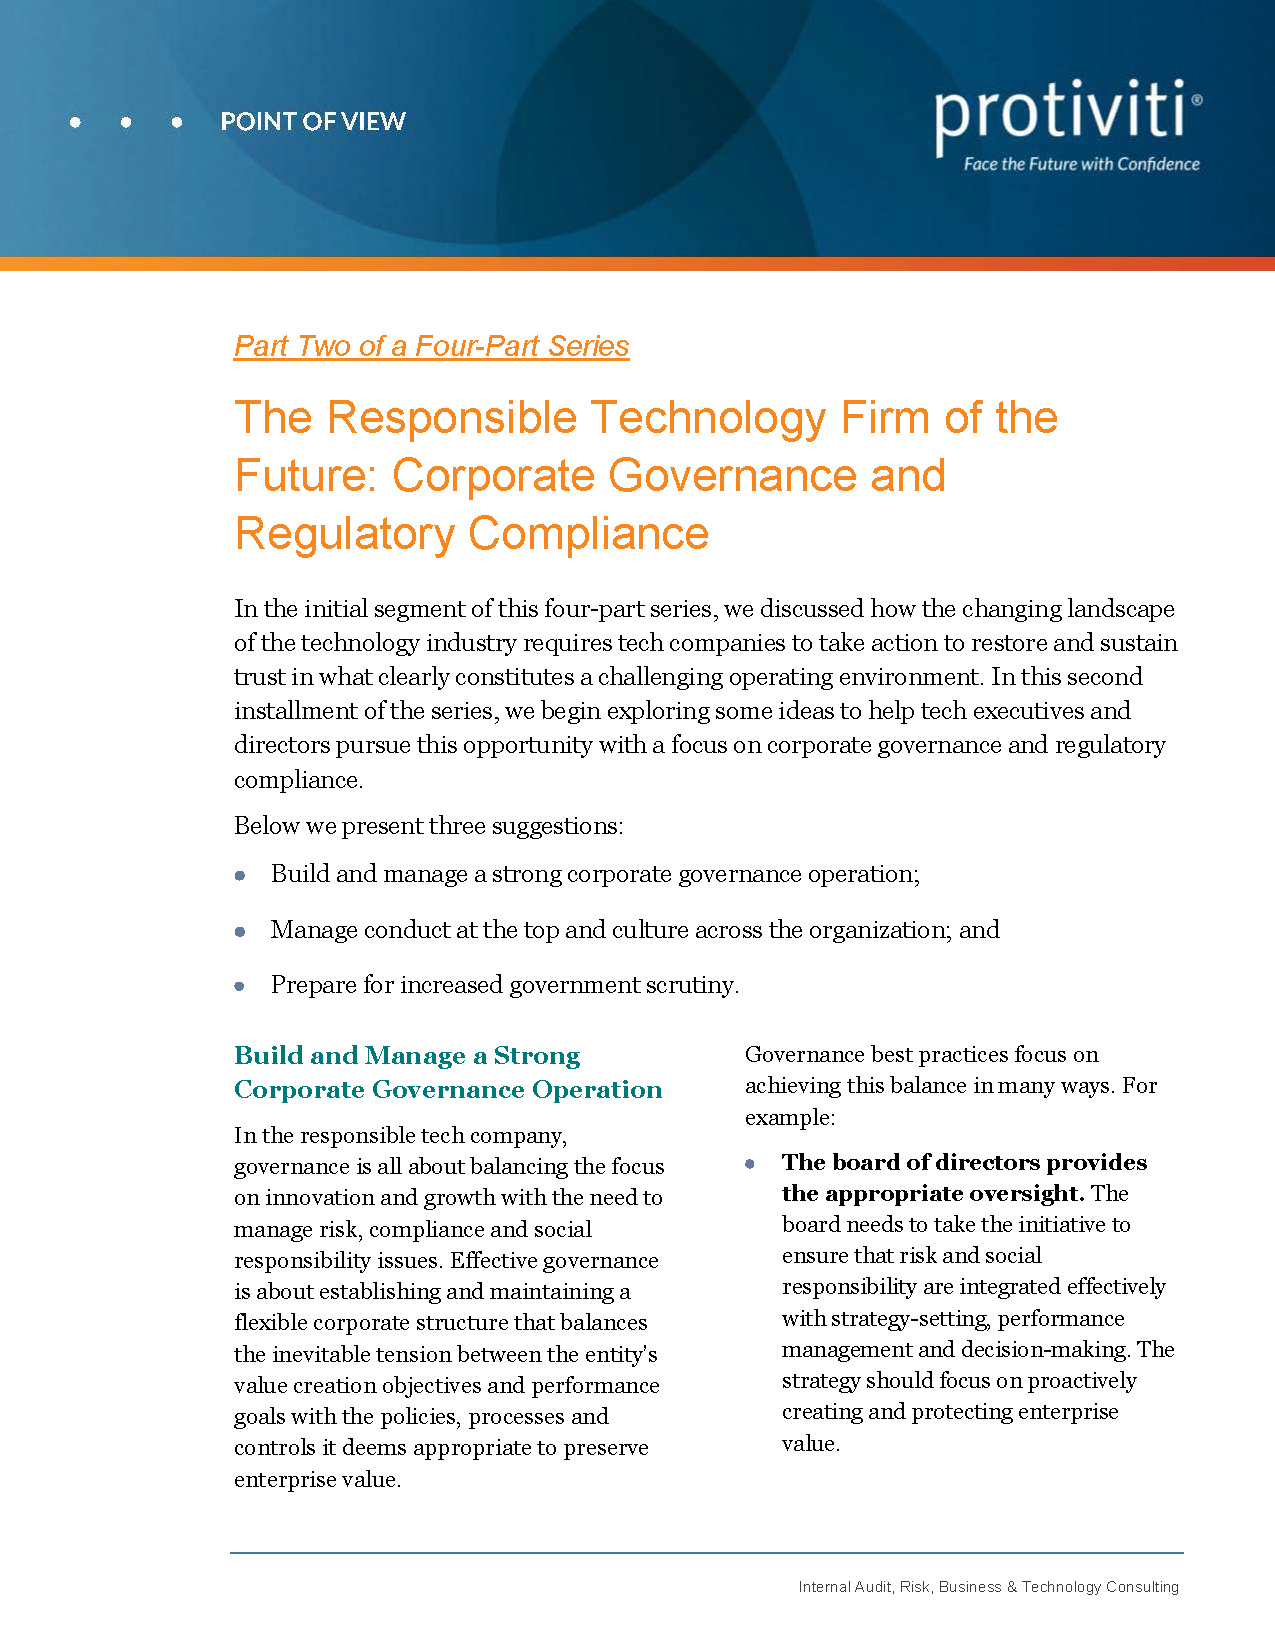 Screenshot of the first page of The Responsible Technology Firm of the Future Corporate Governance and Regulatory Compliance